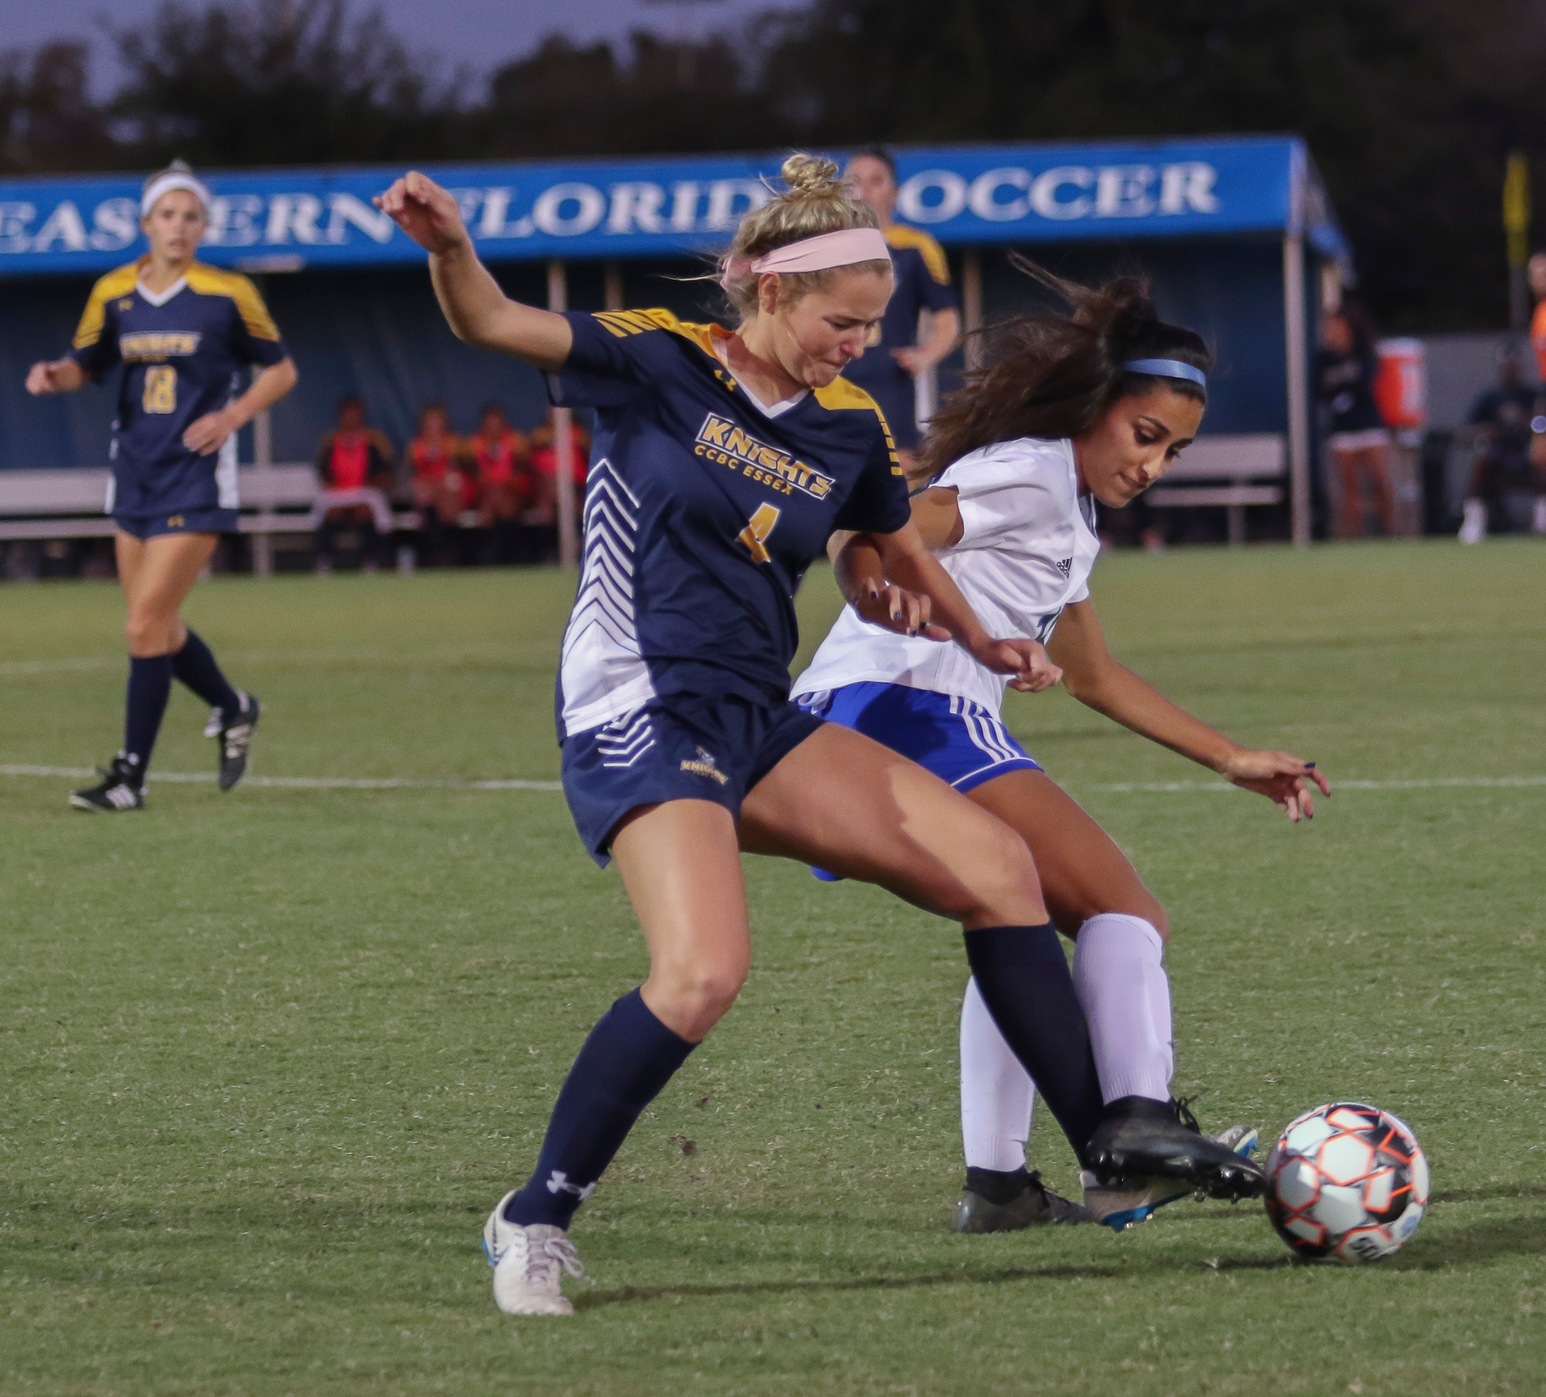 Women's soccer team blanks CCBC Essex in national tournament opener